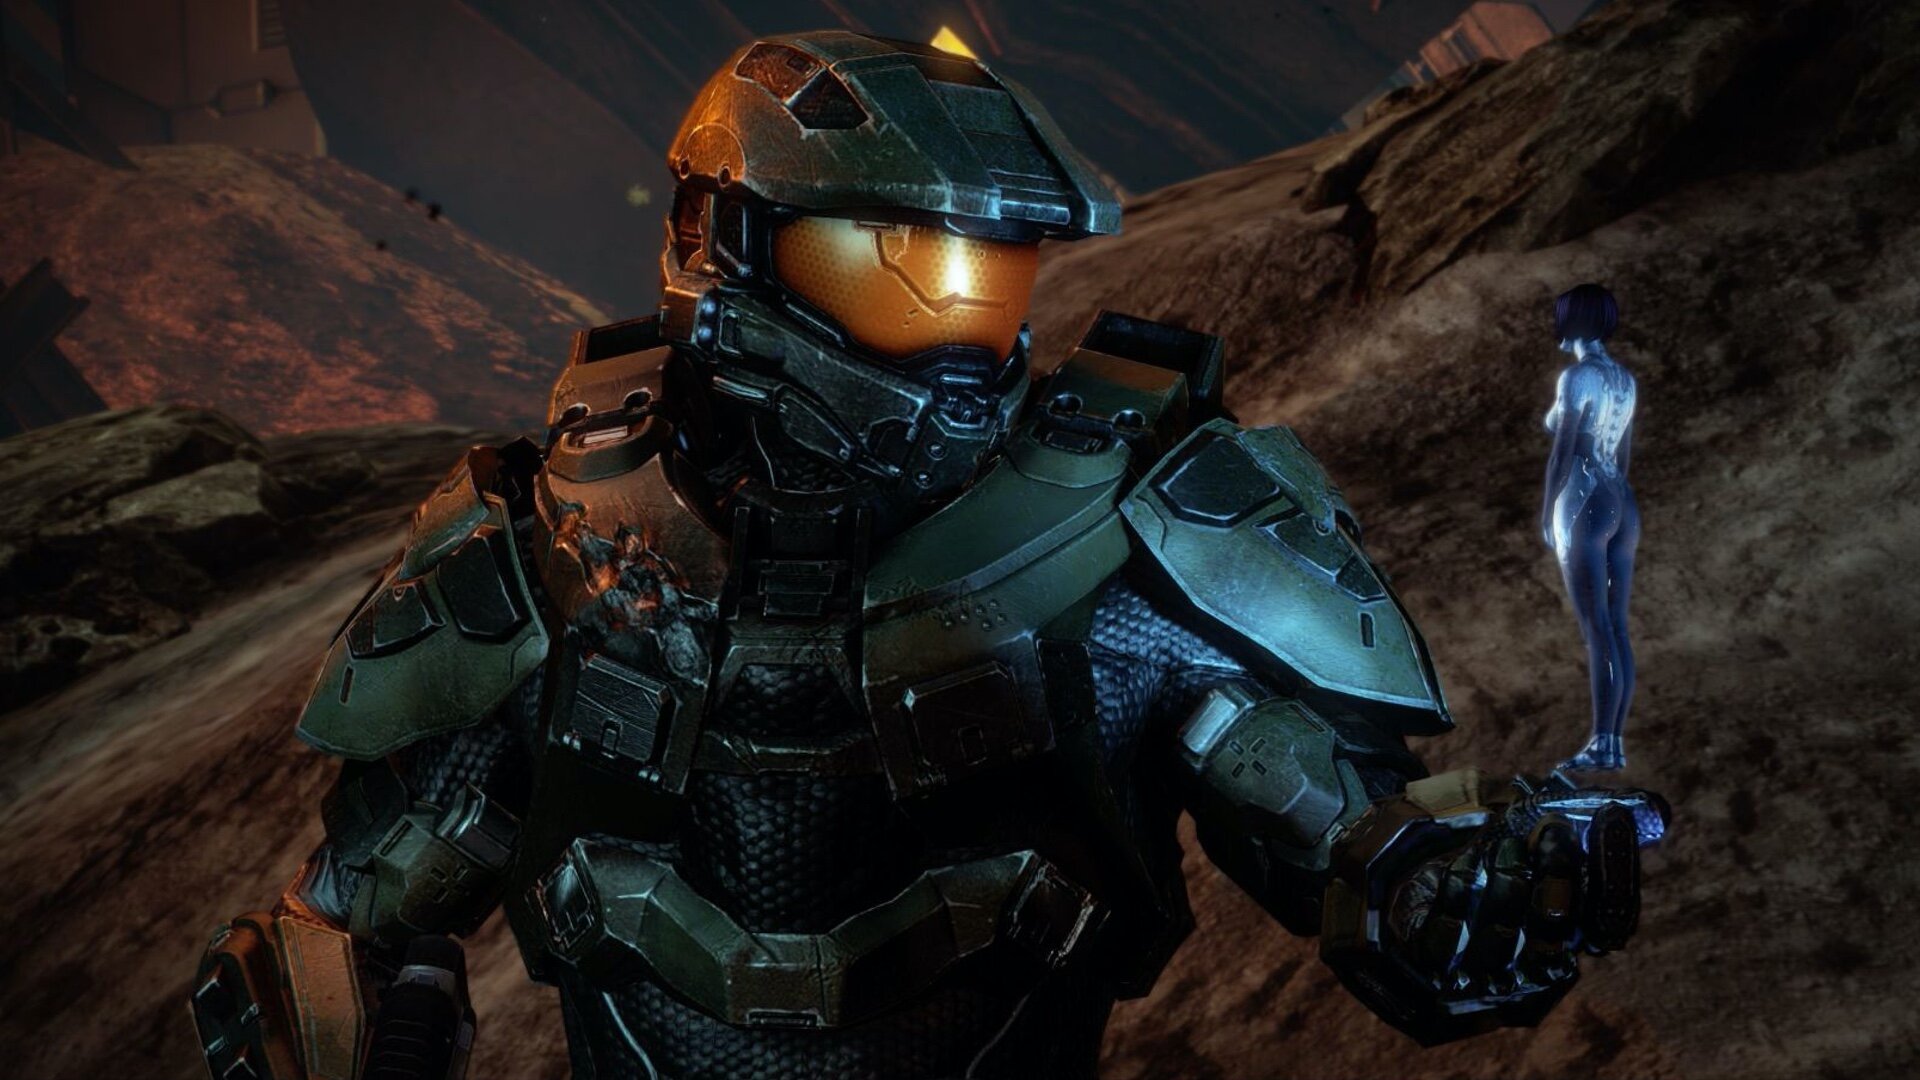 Official Trailer for HALO TV Series Looks Amazing! — GameTyrant